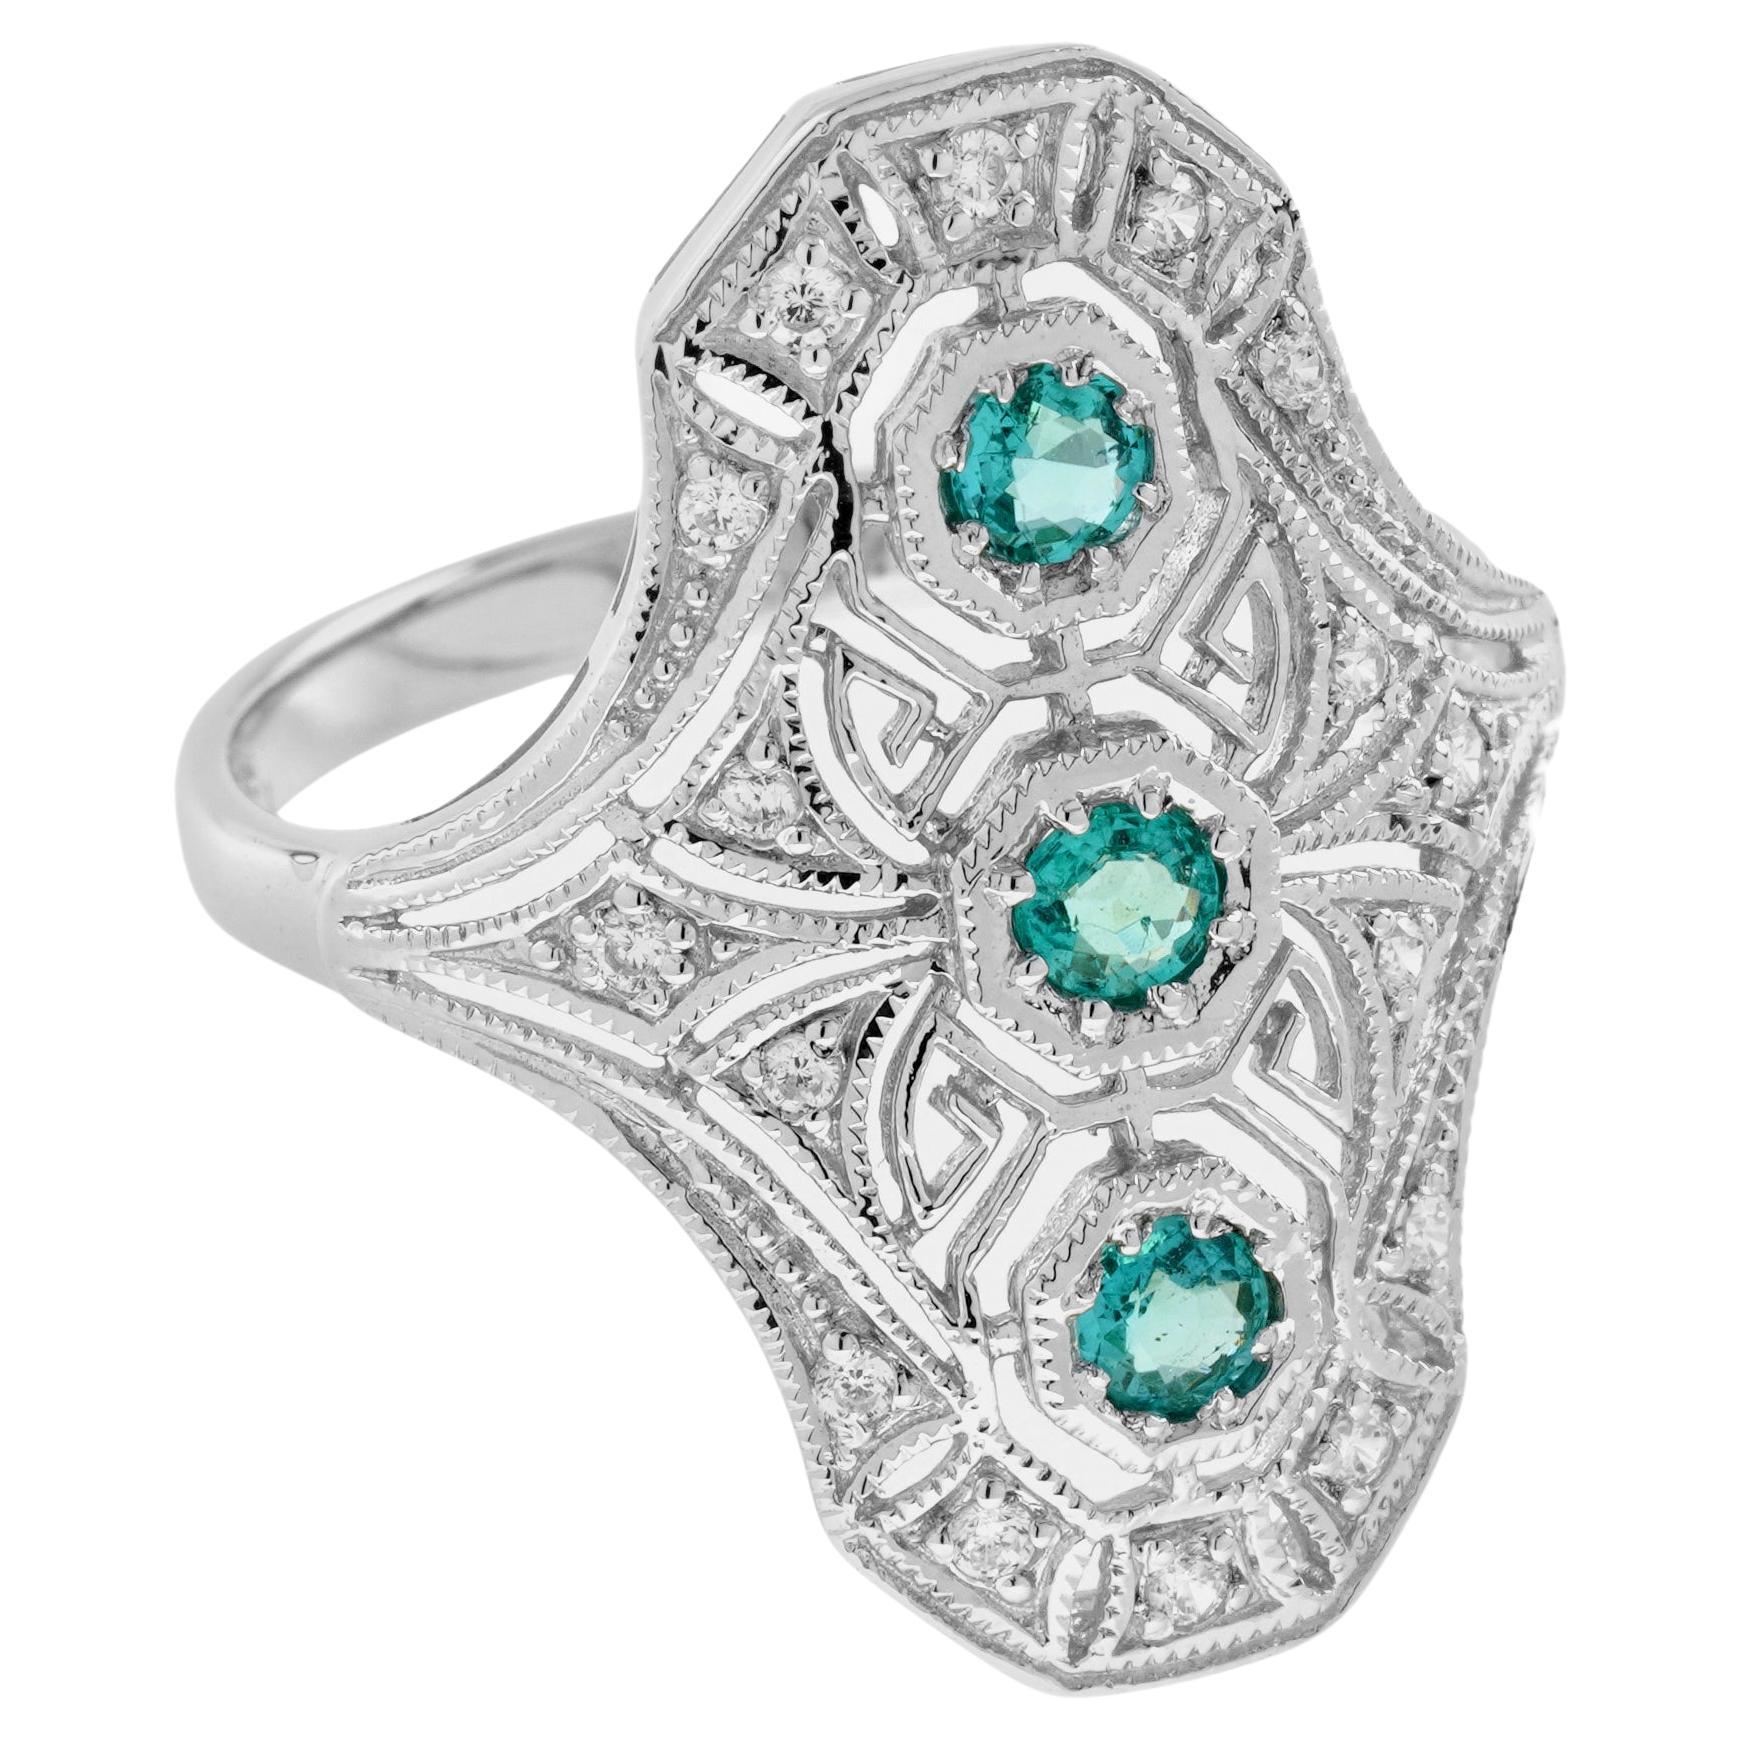 For Sale:  Natural Emerald Diamond Art Deco Style Dinner Ring in Solid 9K White Gold